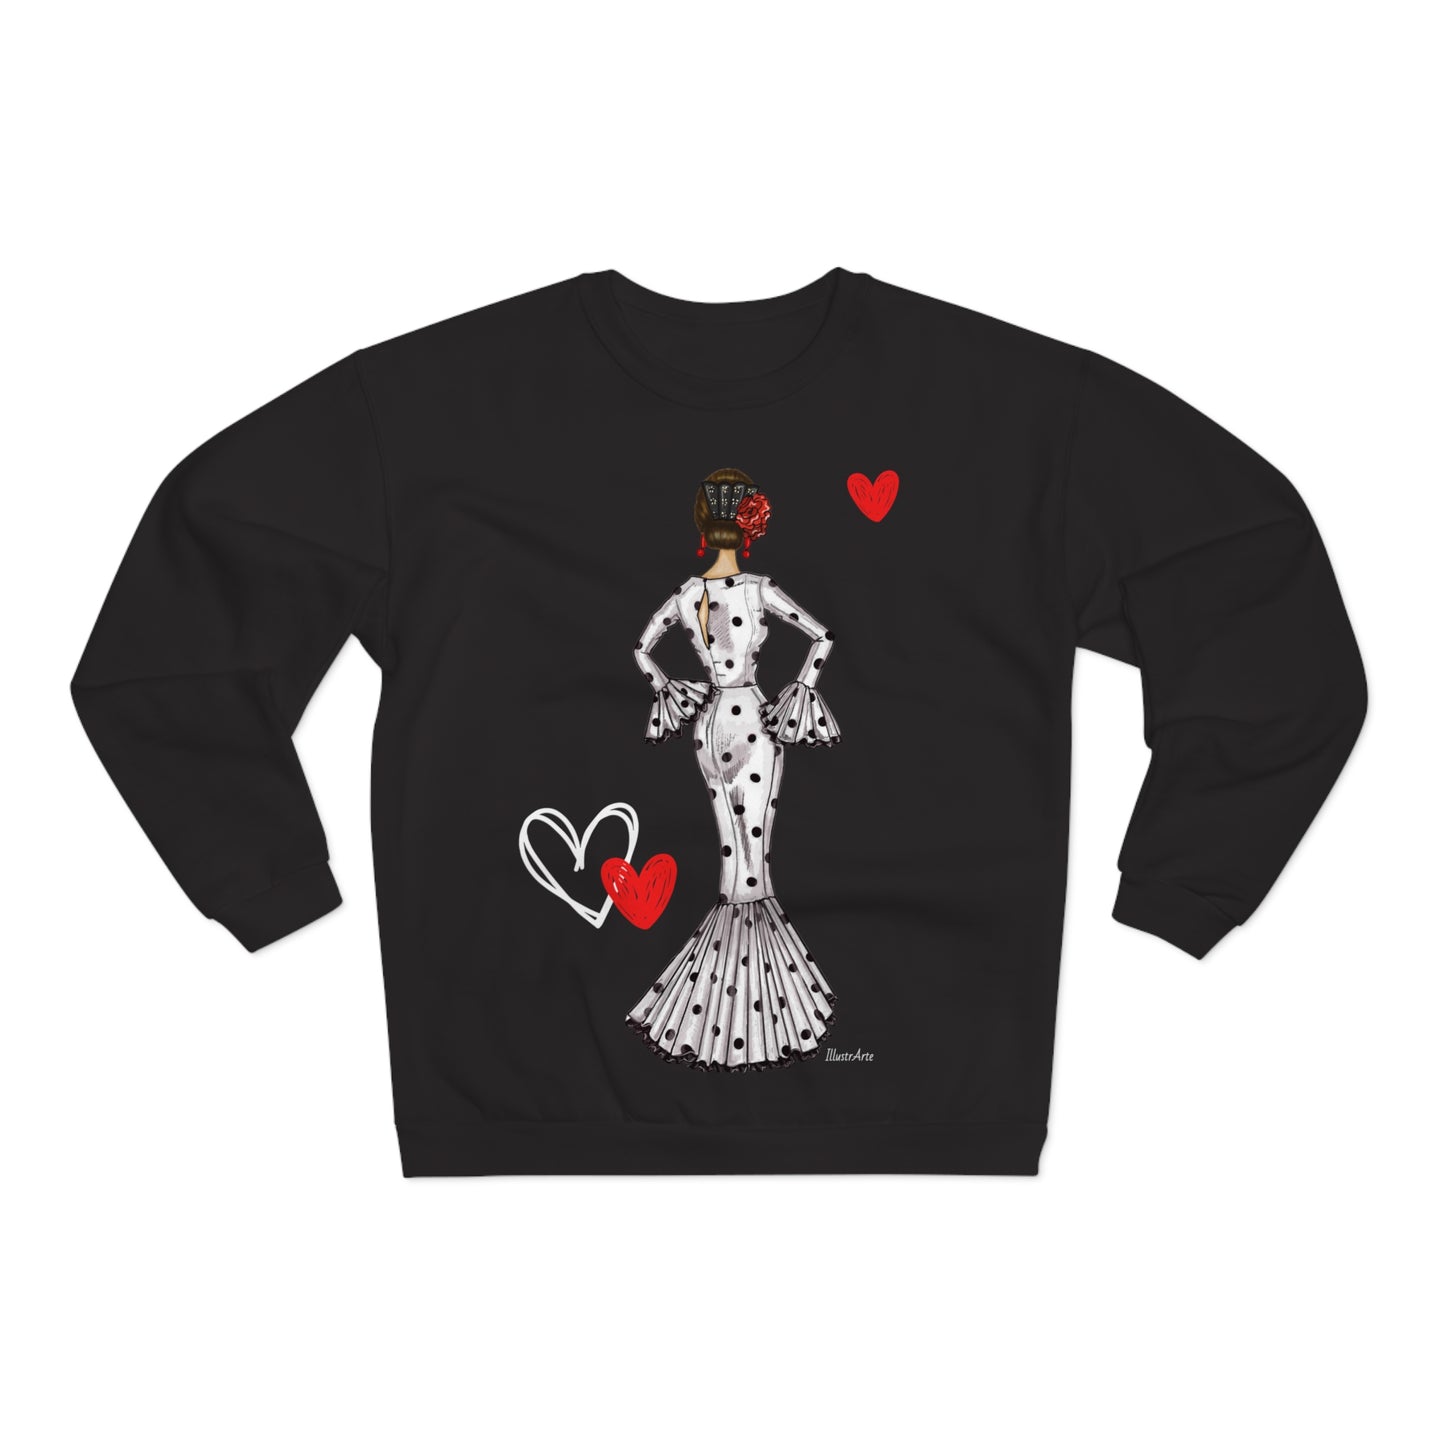 a black sweater with a woman in a dress and a heart